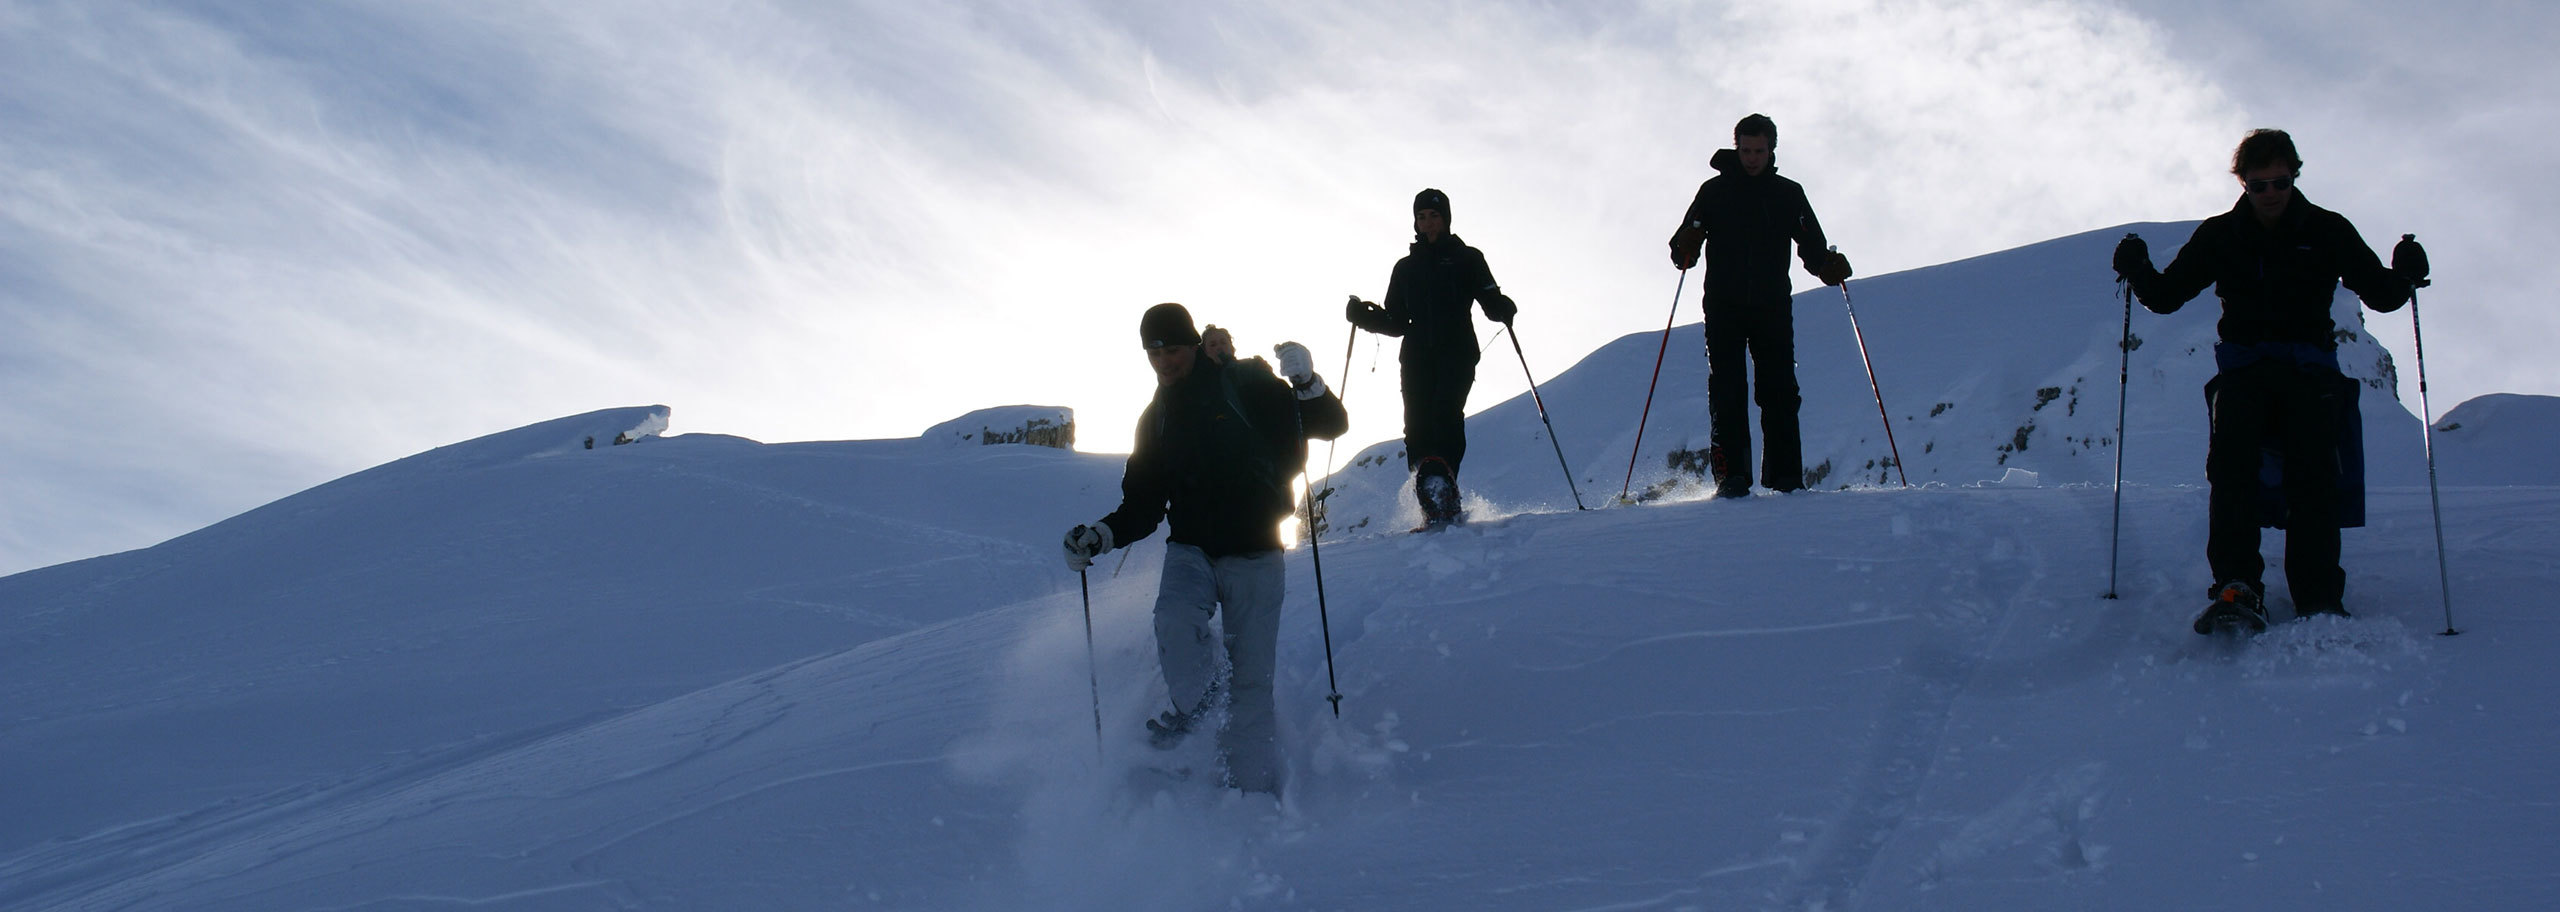 Snowshoeing in Limone Piemonte, Guided Snowshoes Trips